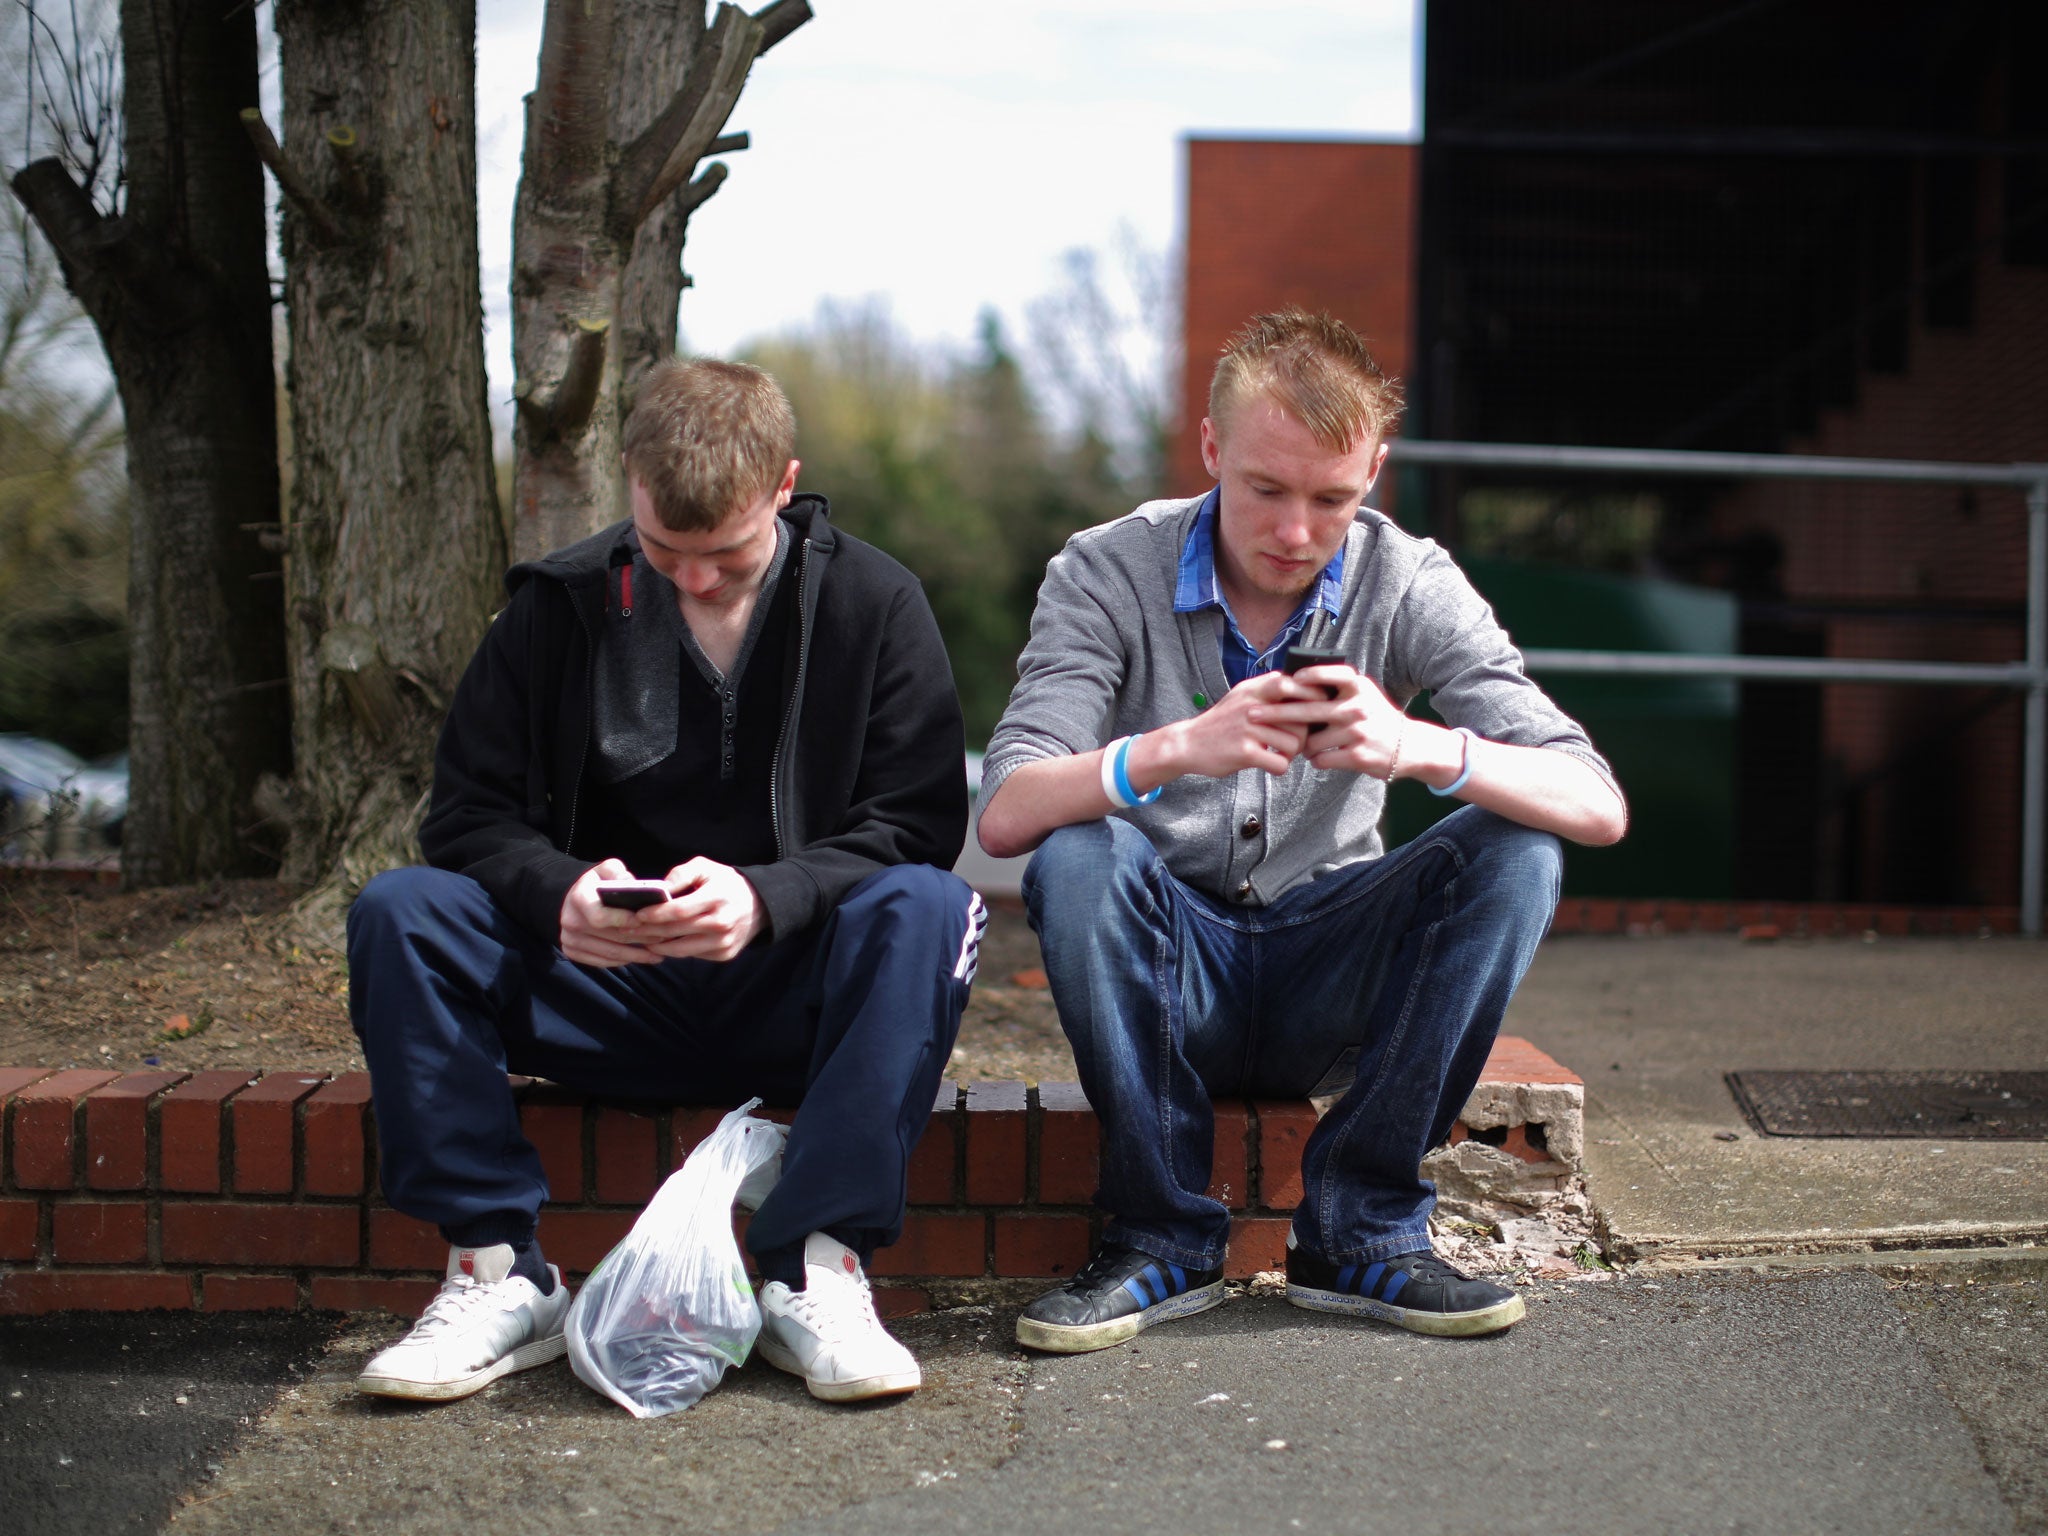 Two youths send text messages on their smart phones in Corby, Northamptonshire, the youth unemployment capital of Britain, on April 24, 2013 in Corby, England.